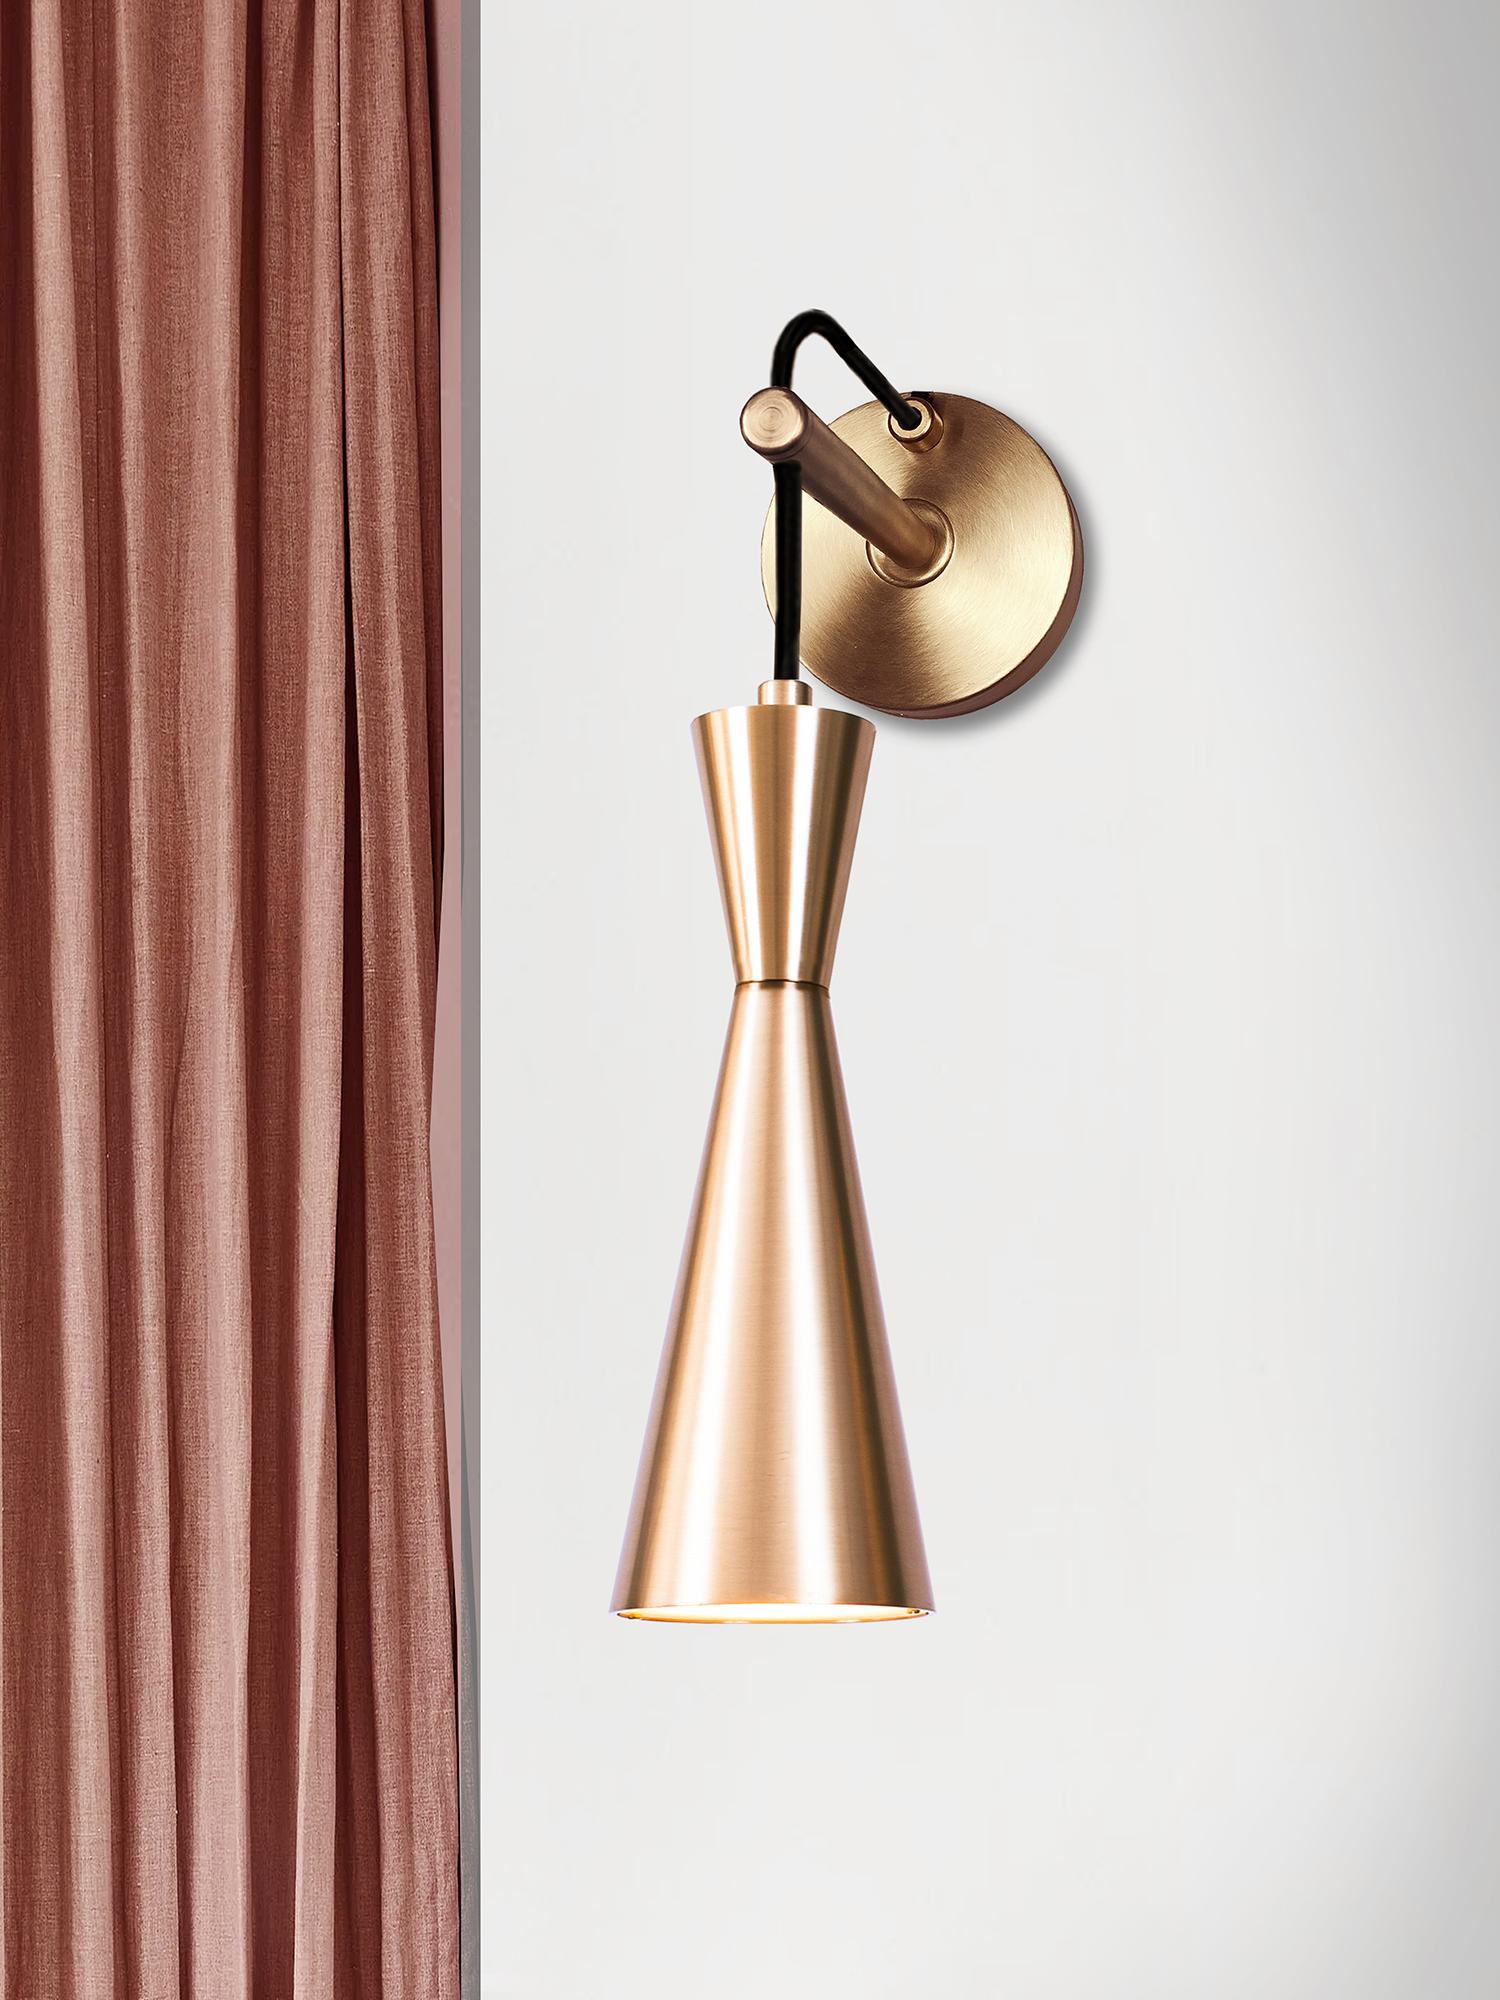 Cone is designed to showcase the beauty and timeless elegance of geometrical symmetry. Each cone is machined from a solid block of brass.

Size: H 33cm (13in) x W 8cm (3.2in) x D 15cm (5.7in)
GU10 LED Bulb.